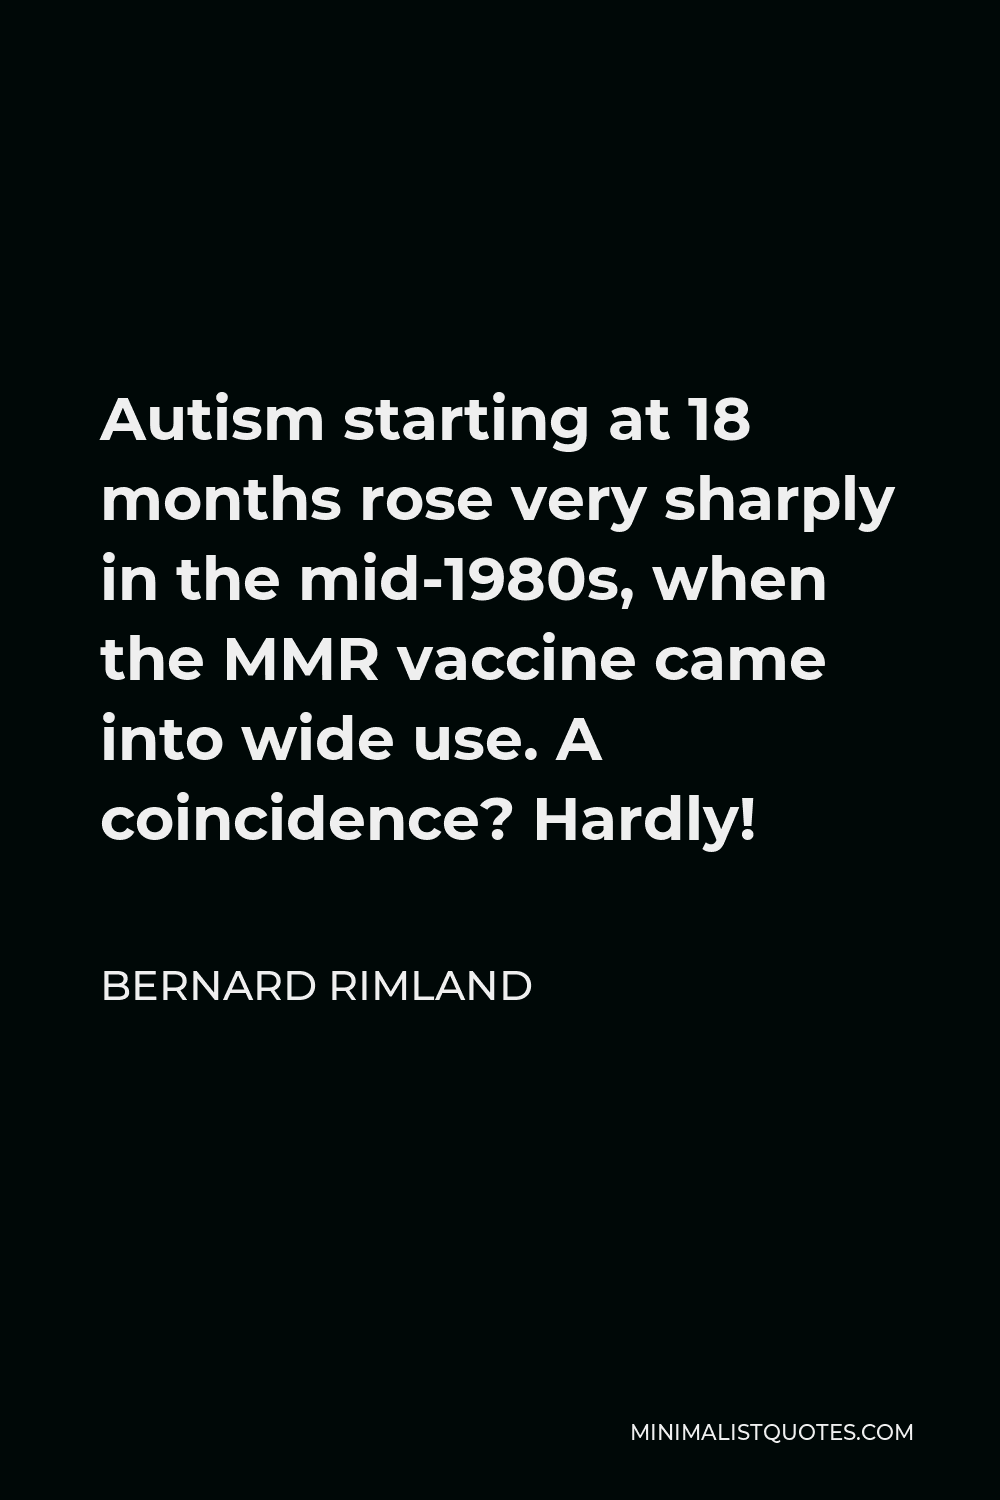 Bernard Rimland Quote - Autism starting at 18 months rose very sharply in the mid-1980s, when the MMR vaccine came into wide use. A coincidence? Hardly!